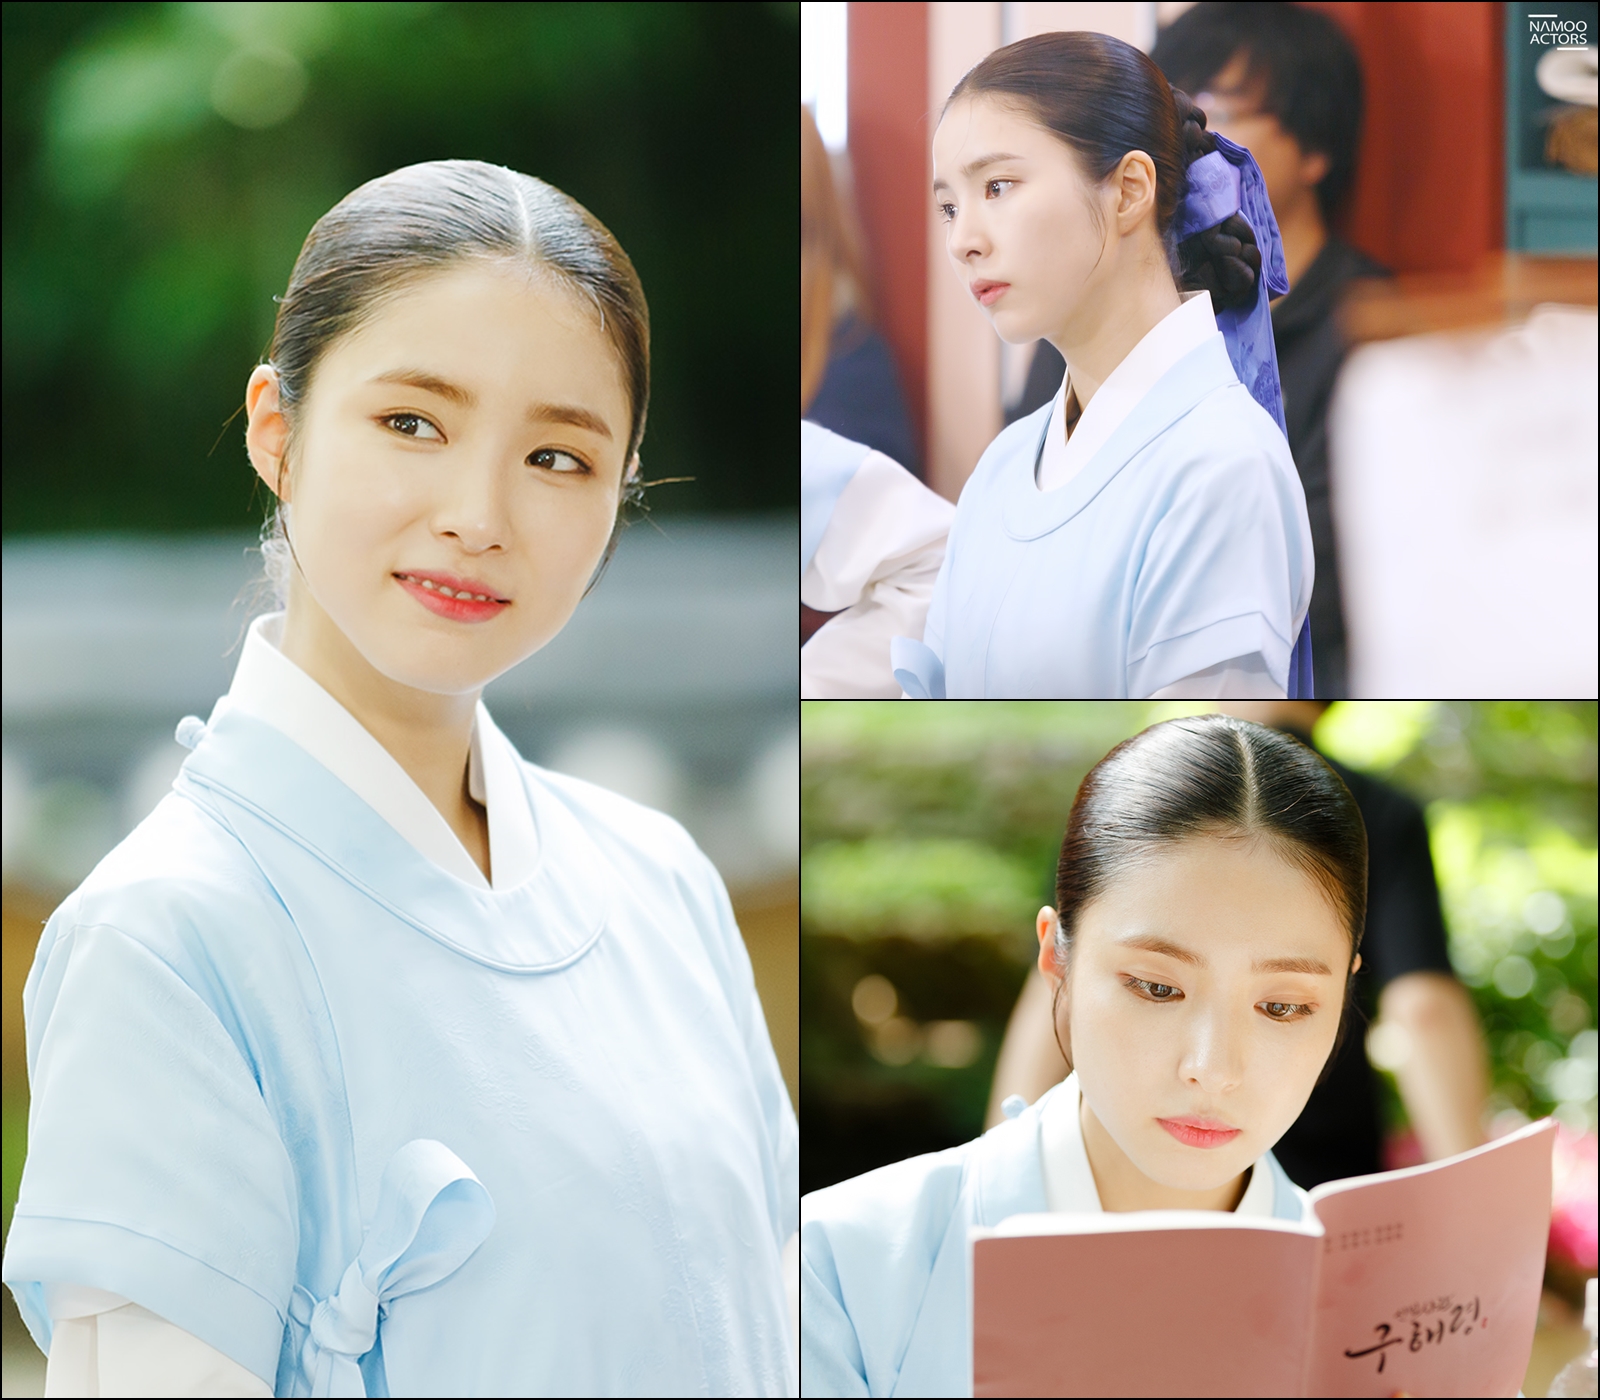 Shin Se-kyungs exit-free charm all falls inMBC drama Na Hae-ryung, which is loved by the audience rating of the drama drama, is a great love.Shin Se-kyung, who is hard-carrying as the main character leading the dramas central axis, is attracting attention every day.He is the first woman () in Korea to create a perfect synchro rate with the old Na Hae-ryung character who plant the precious seed of change.Especially, Shin Se-kyungs delicate acting, which excelled in expressing inner emotions such as joy, anger, sadness and pleasure felt by Na Hae-ryung in the play, gives viewers an amazing sense of immersion and at the same time, the perfection of the work is further enhanced, and it is also showing its strength as a one-top protagonist.Among them, Shin Se-kyungs behind-the-scenes Steel Series, which added another life character through Na Hae-ryung, is open to the public.Shin Se-kyung in SteelSeries shows off his colorful charm and takes away the hearts of viewers at once.Shin Se-kyungs fresh smile makes everyone feel good, and his cool smile, staring at the camera, brightly illuminates the surroundings.Also, in the behind-the-scenes SteelSeries, Shin Se-kyungs hot acting passion is felt.Shin Se-kyung is ready to shoot perfectly with serious eyes and facial expressions even before the full-scale shooting begins, and he can also see the attitude of being sucked into the script.Shin Se-kyung, who is always enthusiastic about shooting regardless of time and place, is the back door that the atmosphere of the scene is warmer.Shin Se-kyung, who is filling the Na Hae-ryung with his brilliant presence, seems to continue through the heat.iMBC Photos for Tree Ectus